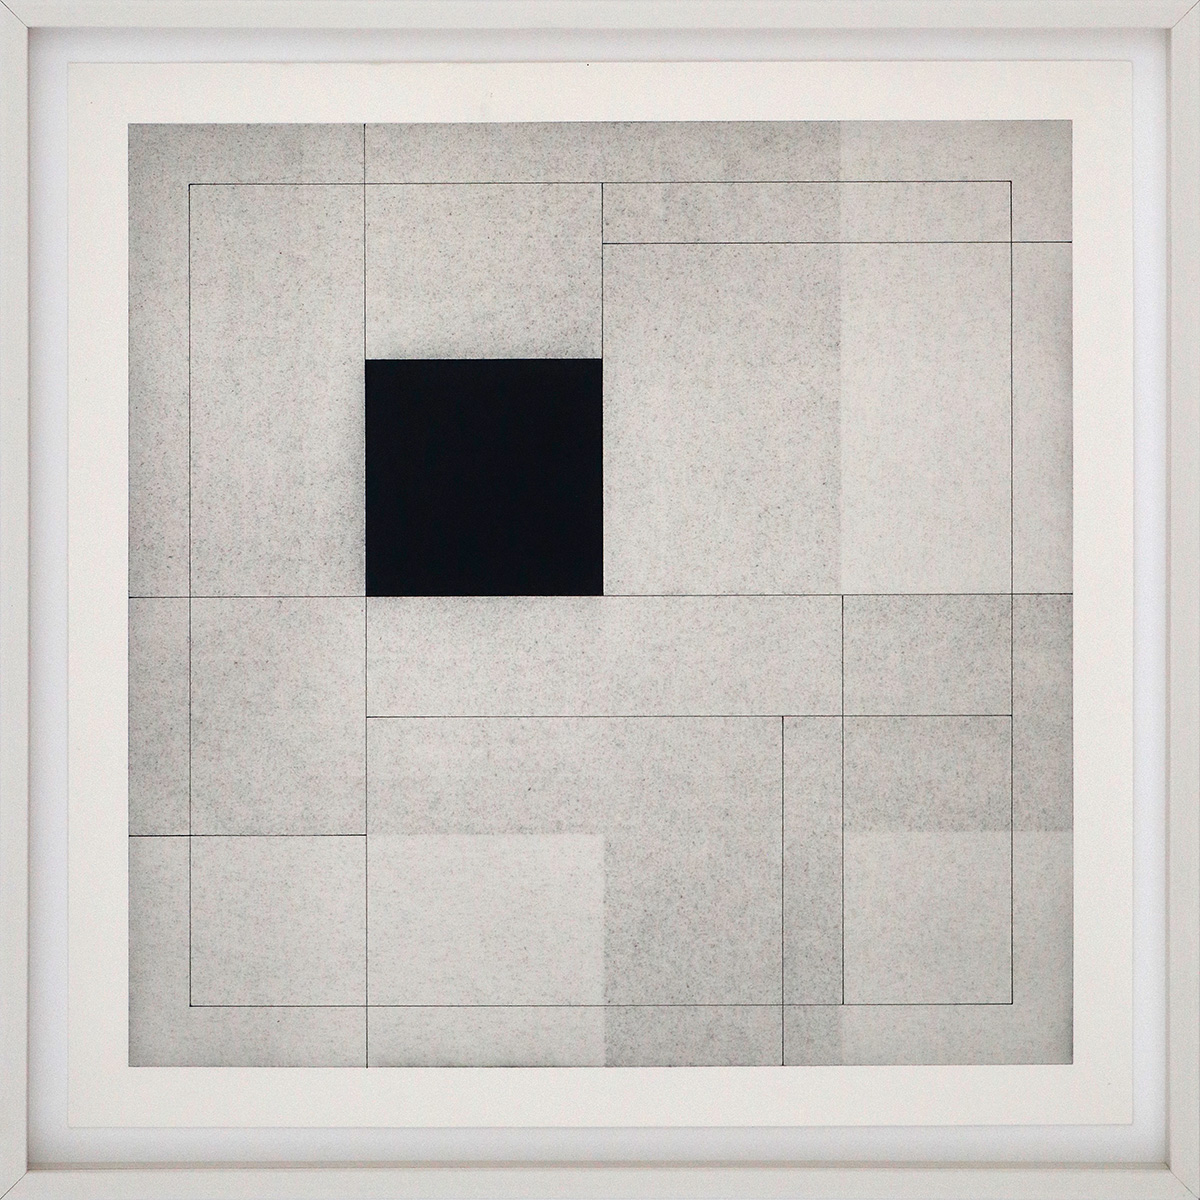 p.m. II/1, 200340 x 40 cm in 51 x 51 cmCharcoal and ink on paper; framed, museum glass 